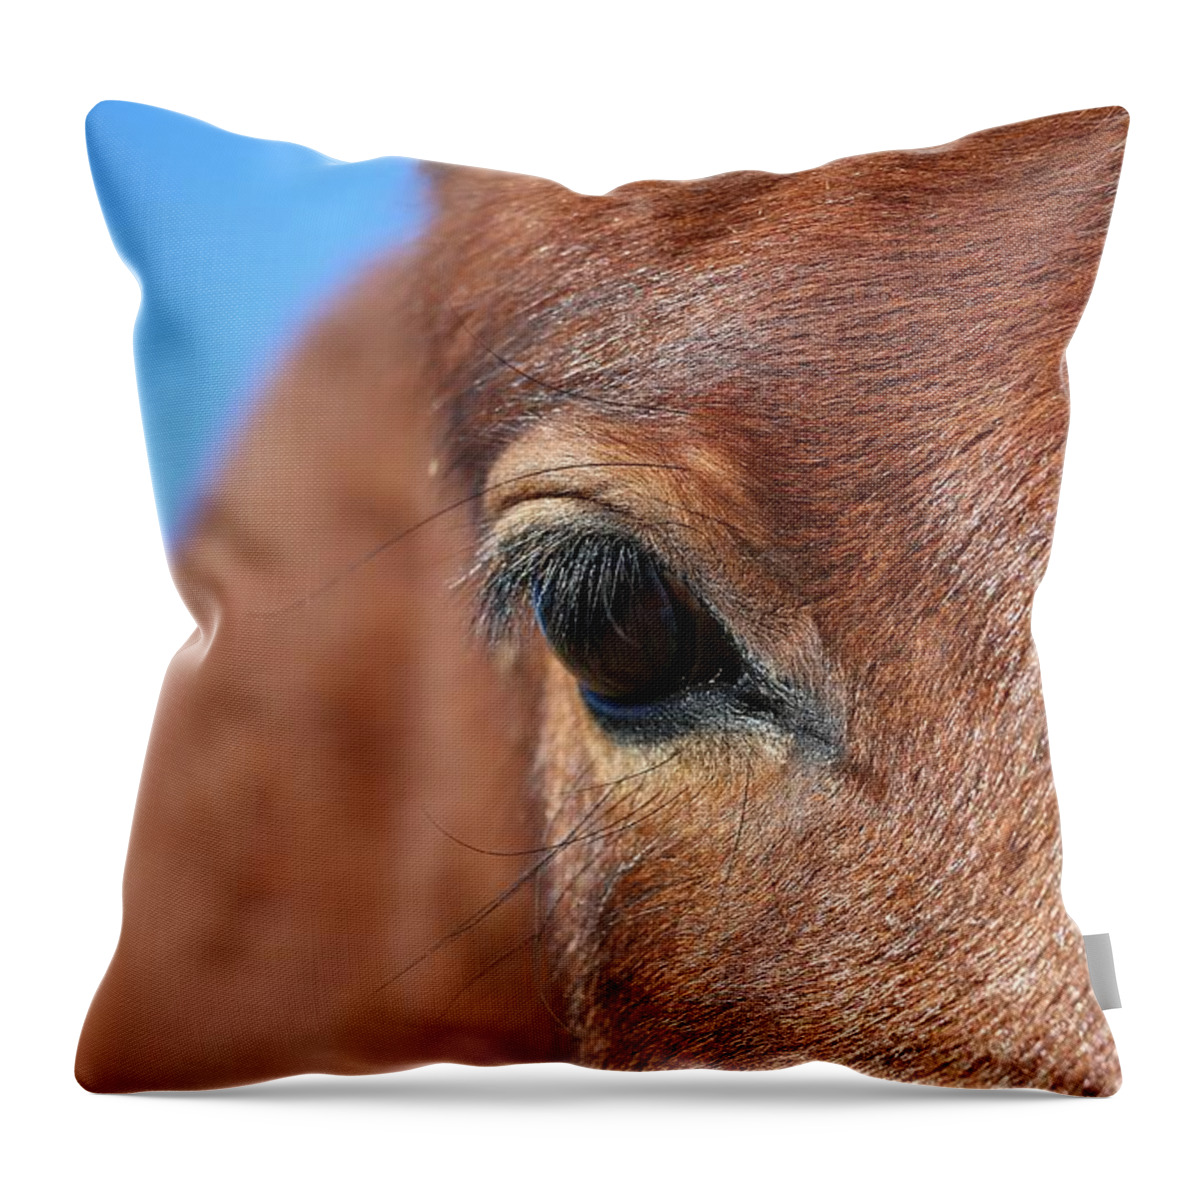 Virginia Range Mustangs Throw Pillow featuring the photograph Mustang Macro #1 by Maria Jansson